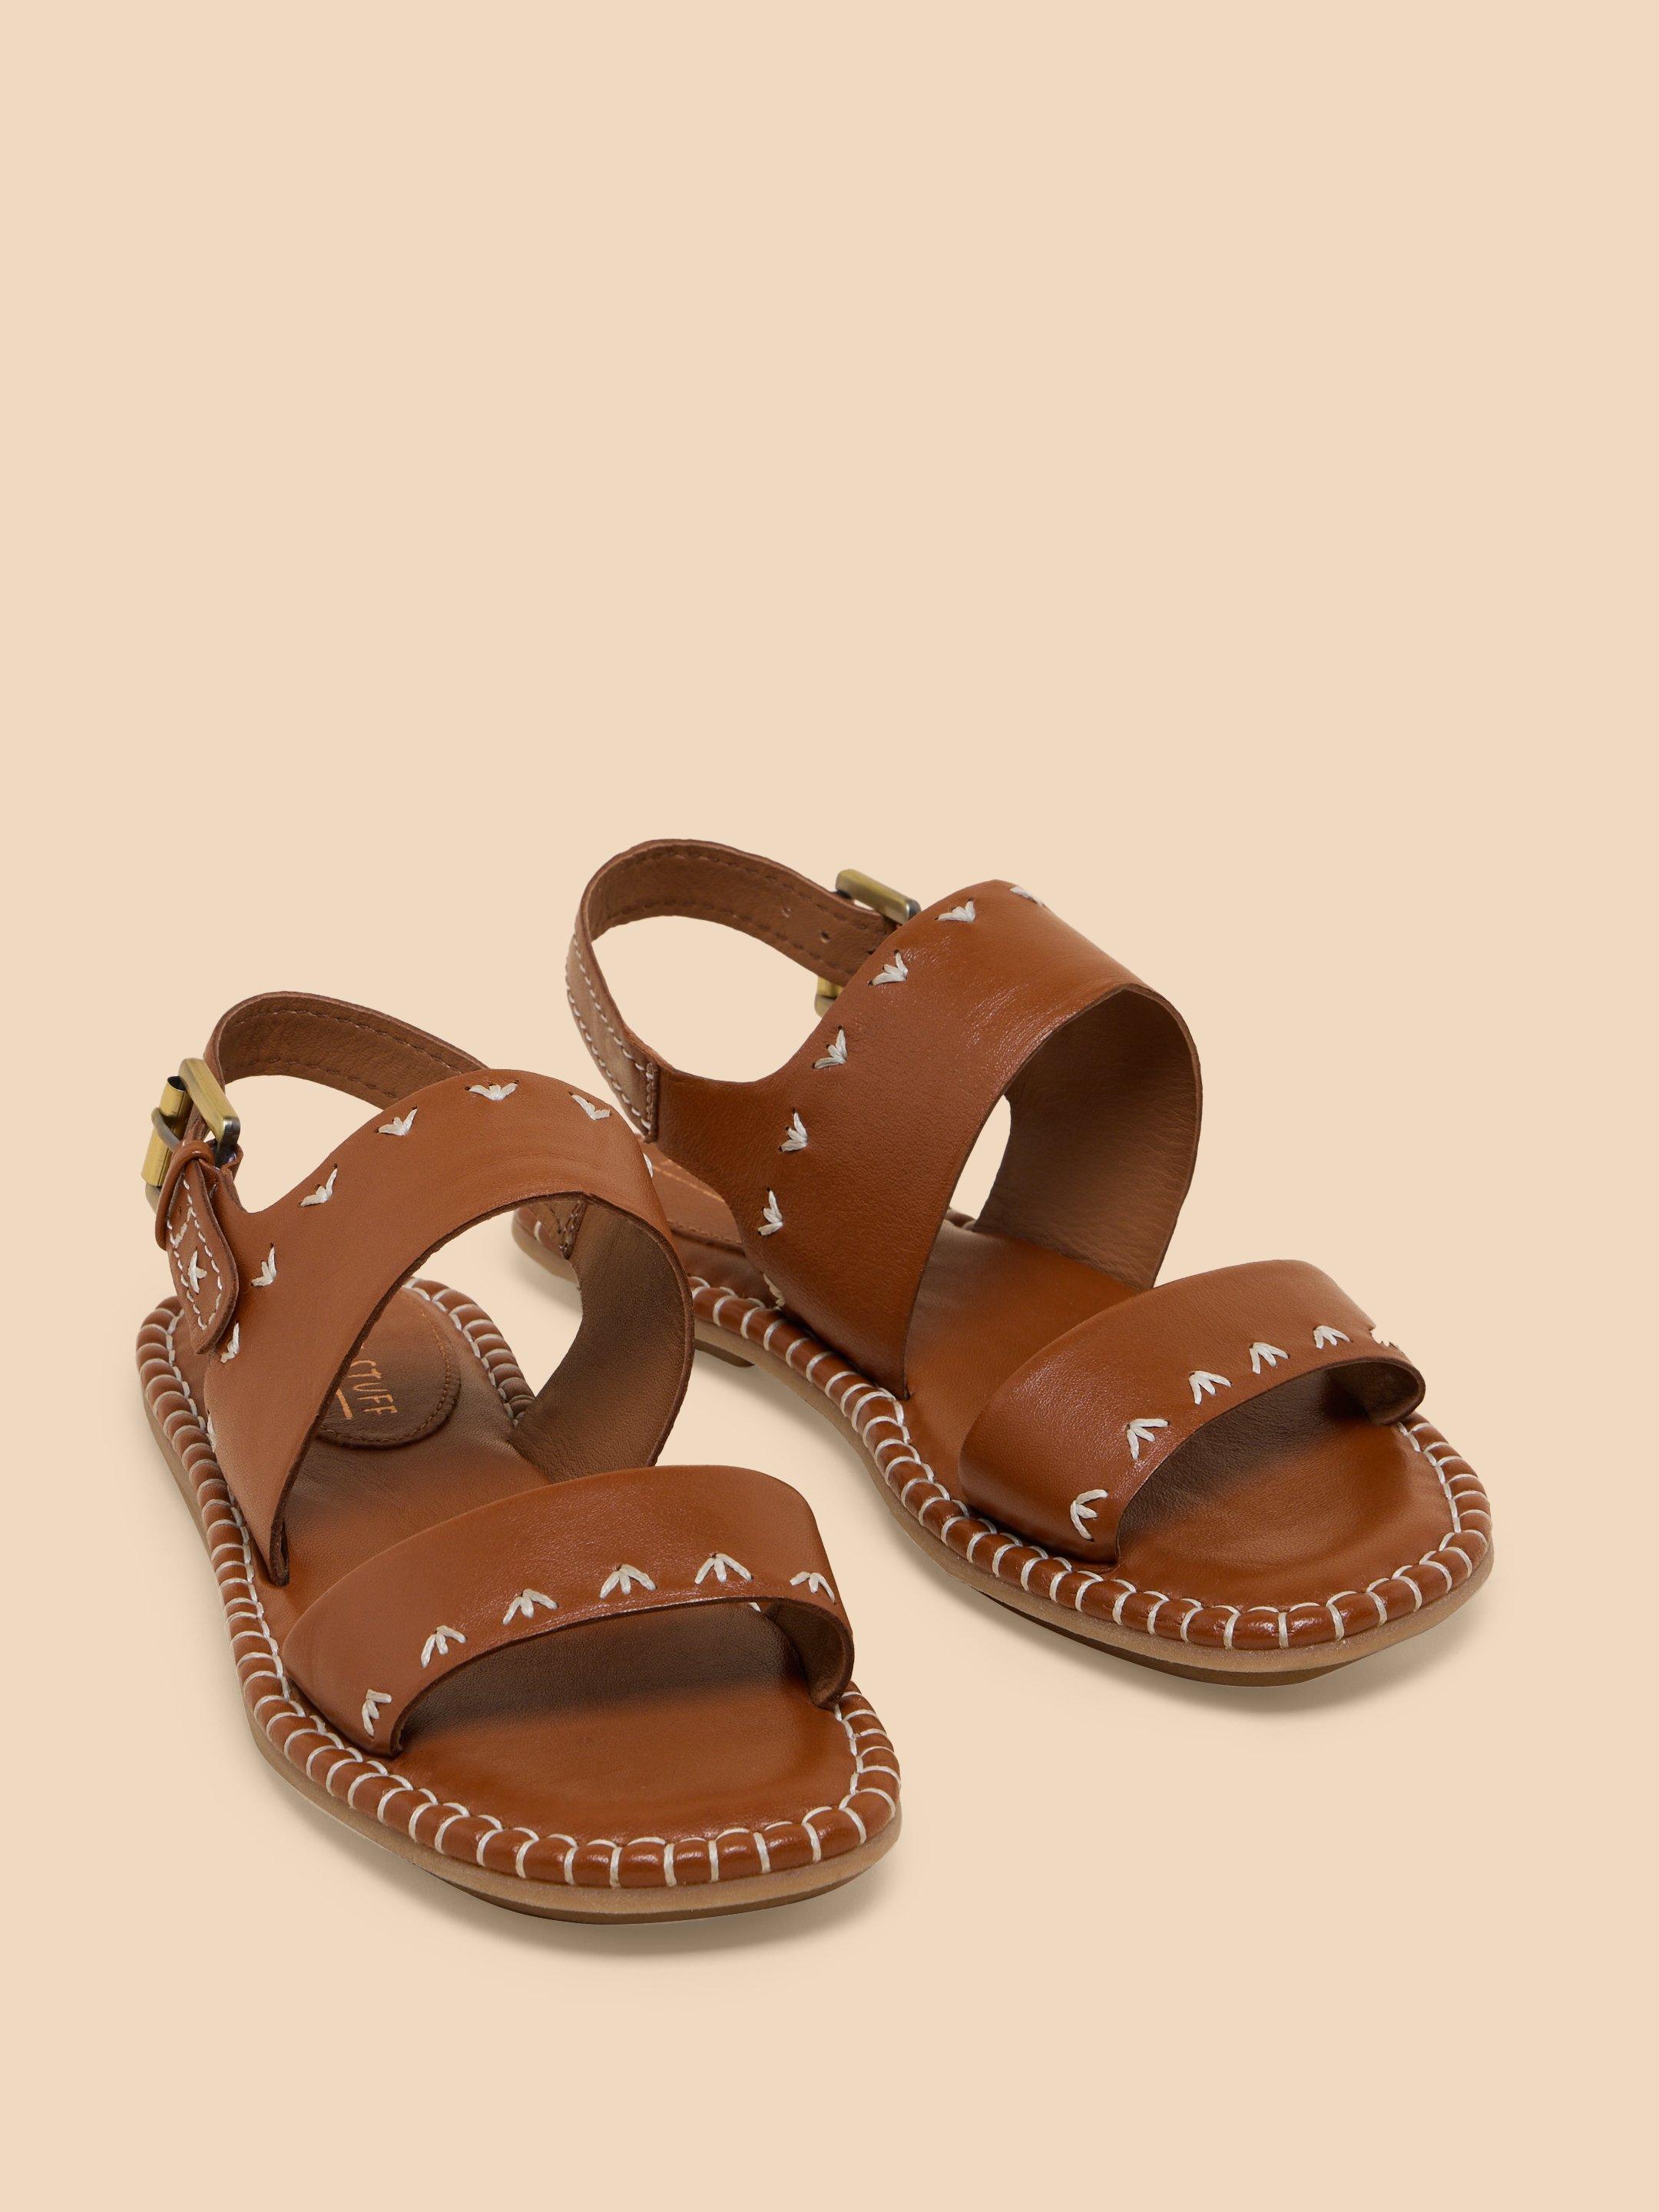 Sweetpea Leather Sandal in MID TAN - FLAT FRONT